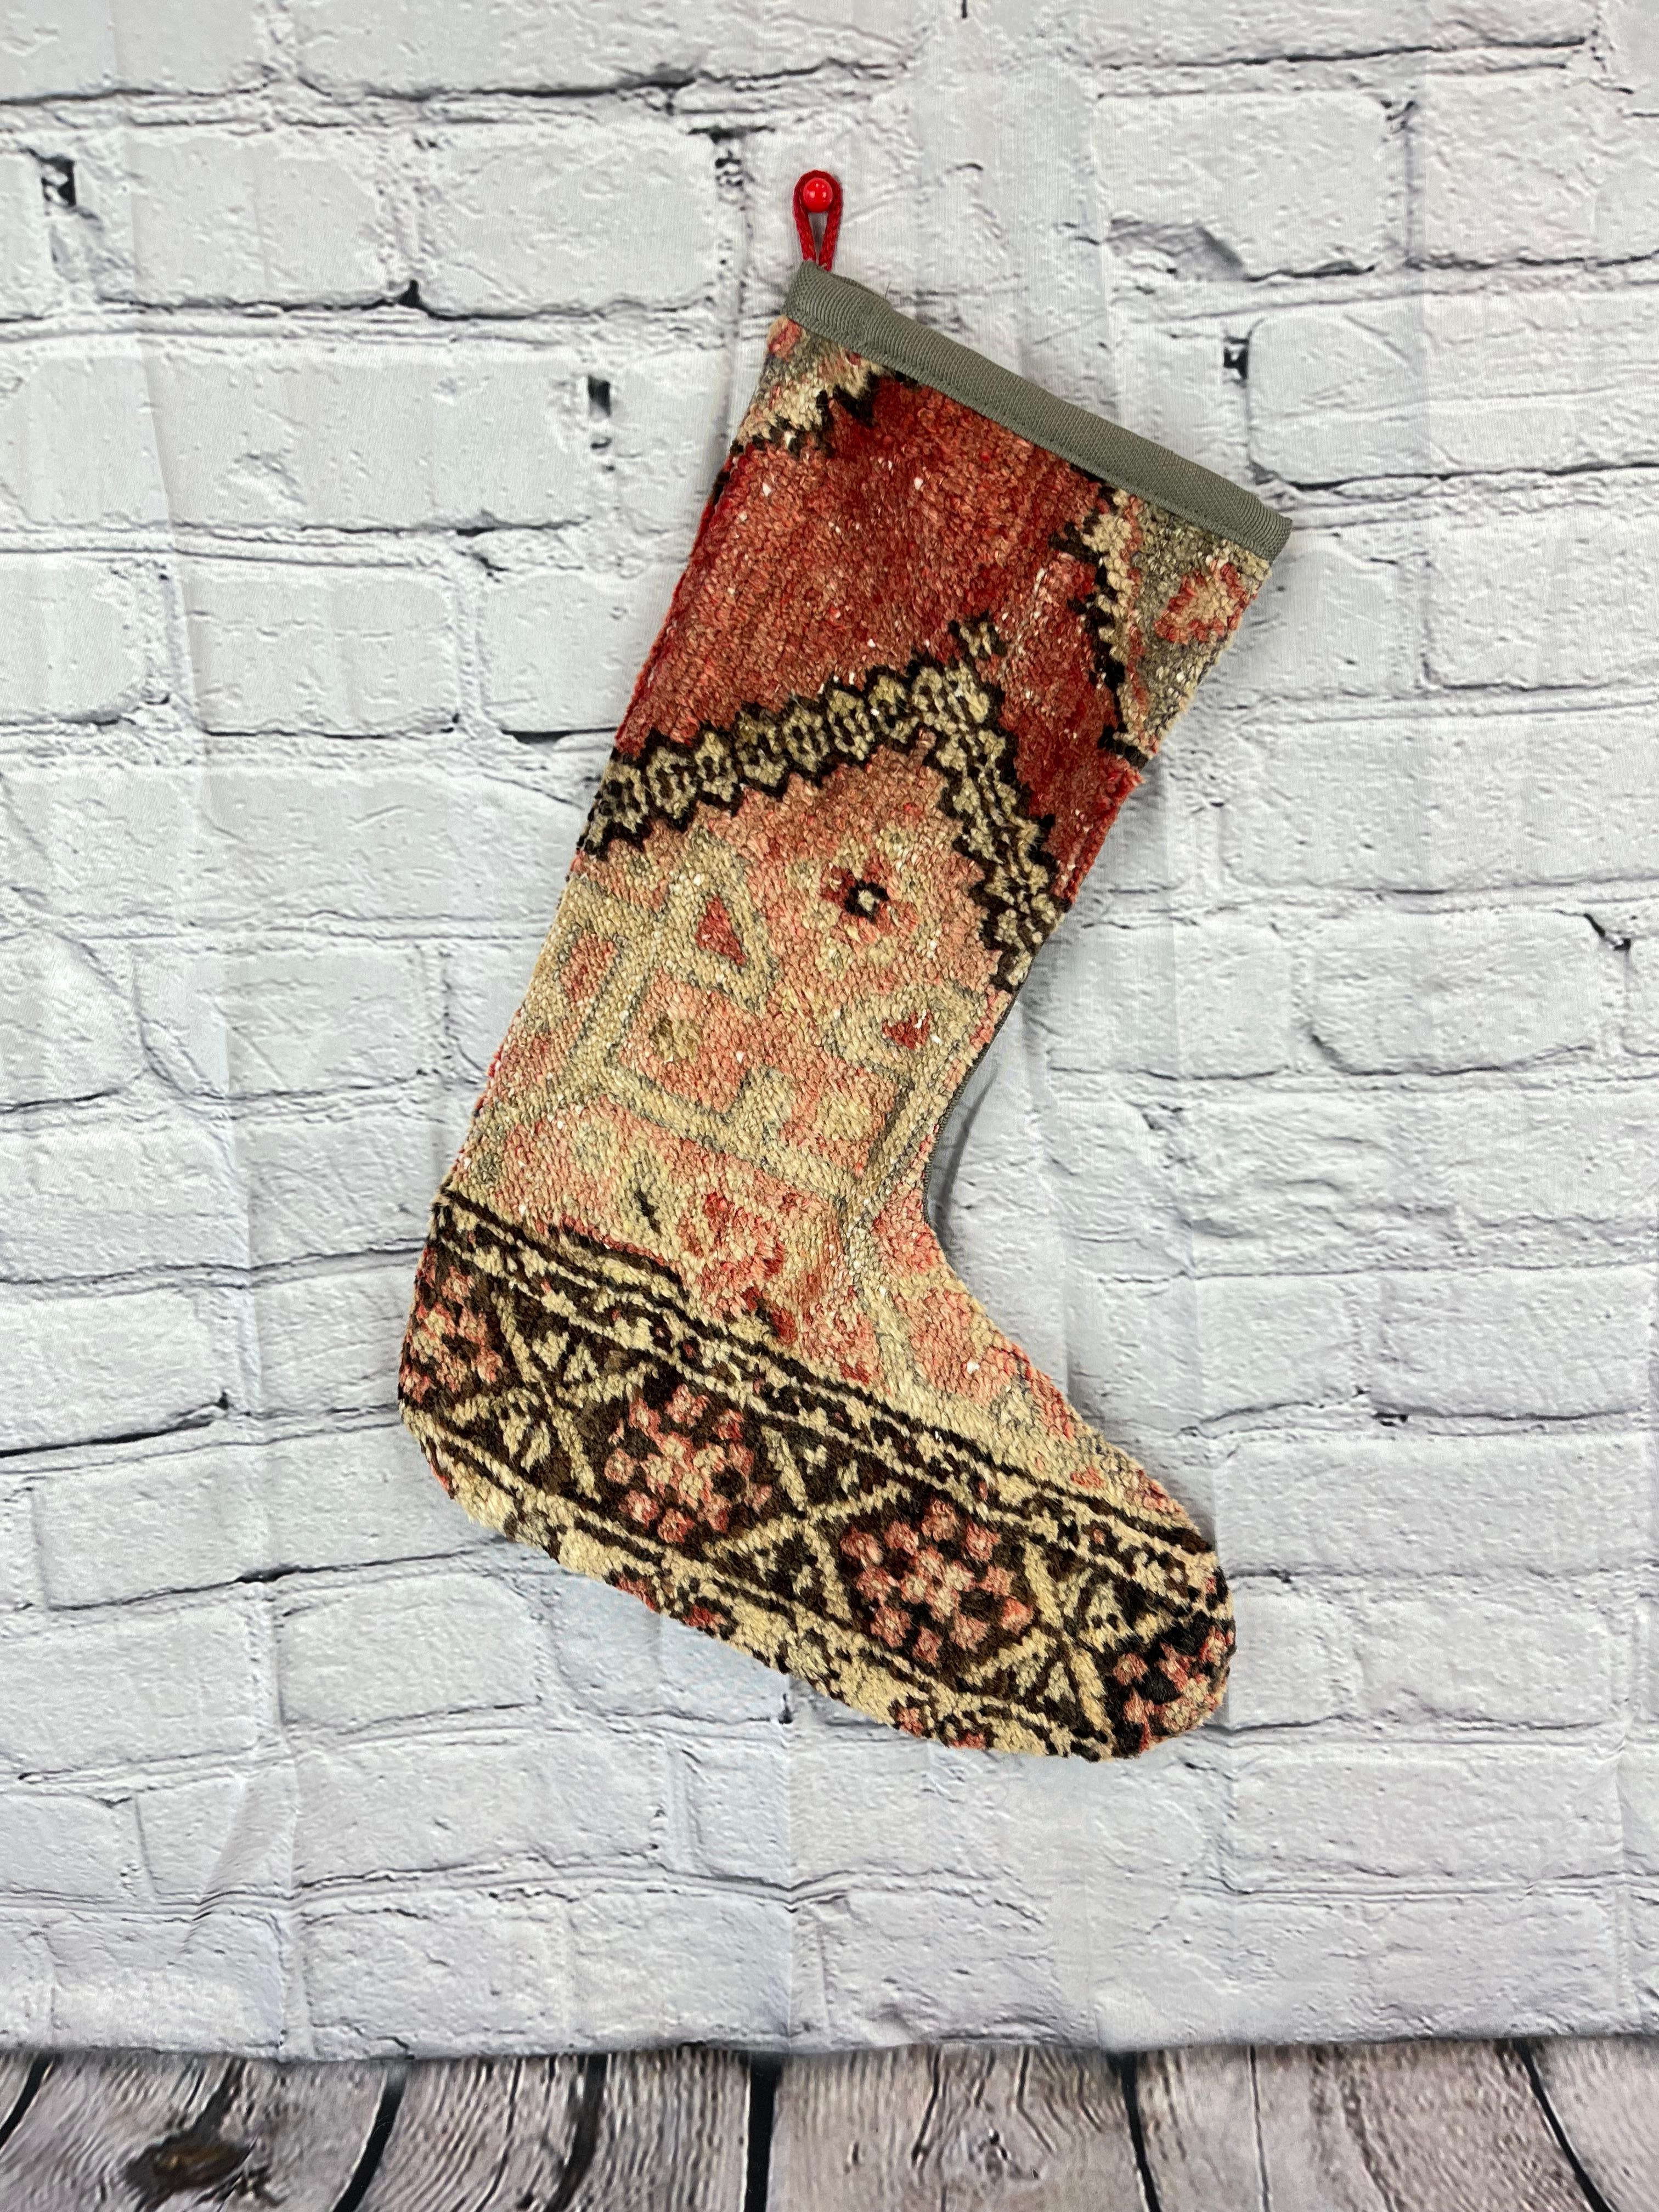 Handmade
Vintage from the 1960s
Materials: wool, cotton

Sustainable, upcycled Turkish rug Christmas stocking made from hand-woven rug fragments. 
Width: 13 inches
Height: 17 inches
Christmas Stocking
Turkish Rug Stocking
Handmade Stocking
Vintage